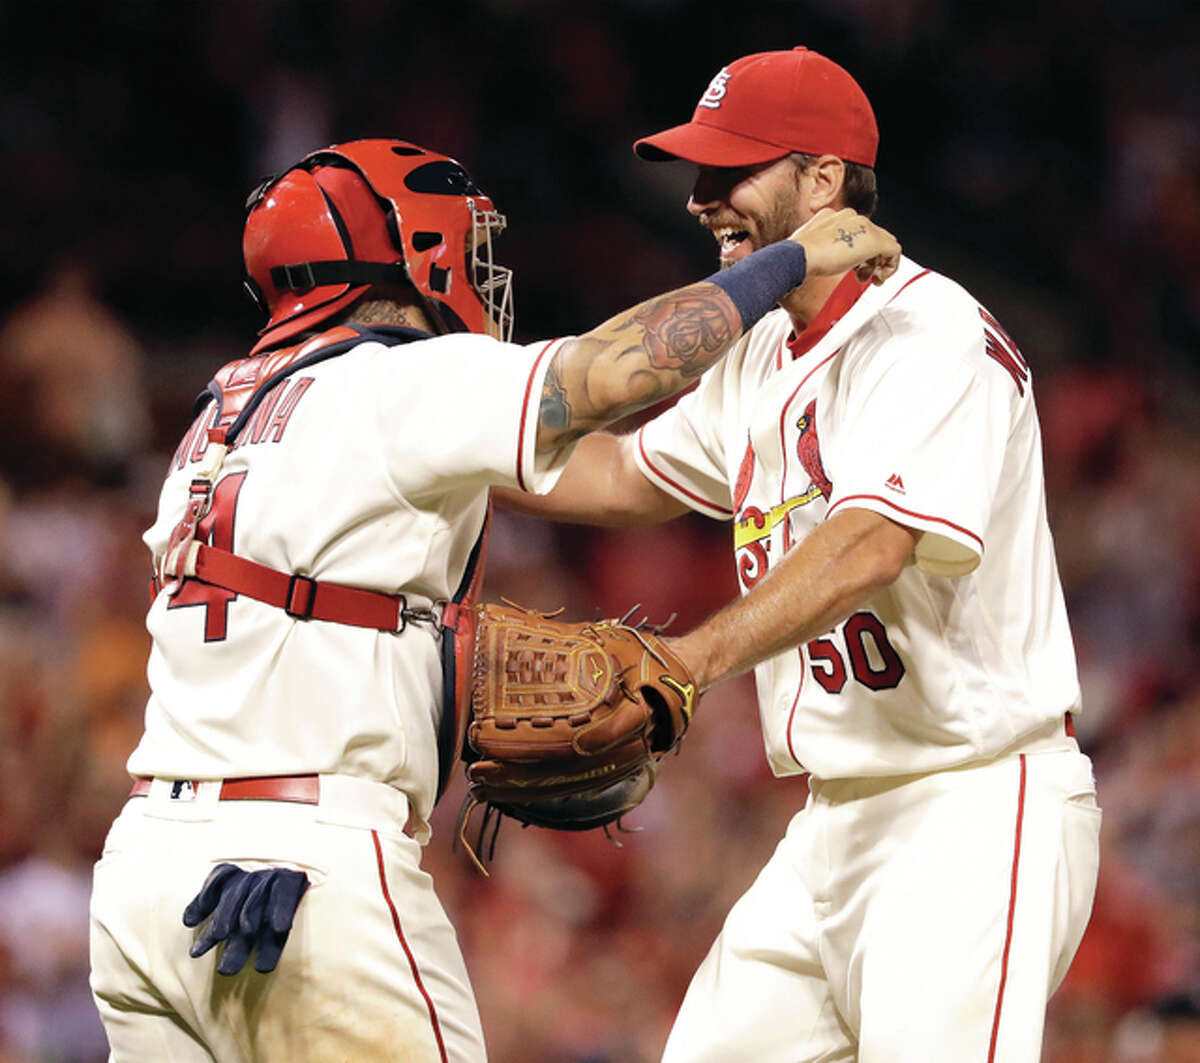 Cardinals' right hander Adam Wainwright, 42, says he has thrown his final  pitch, Sports